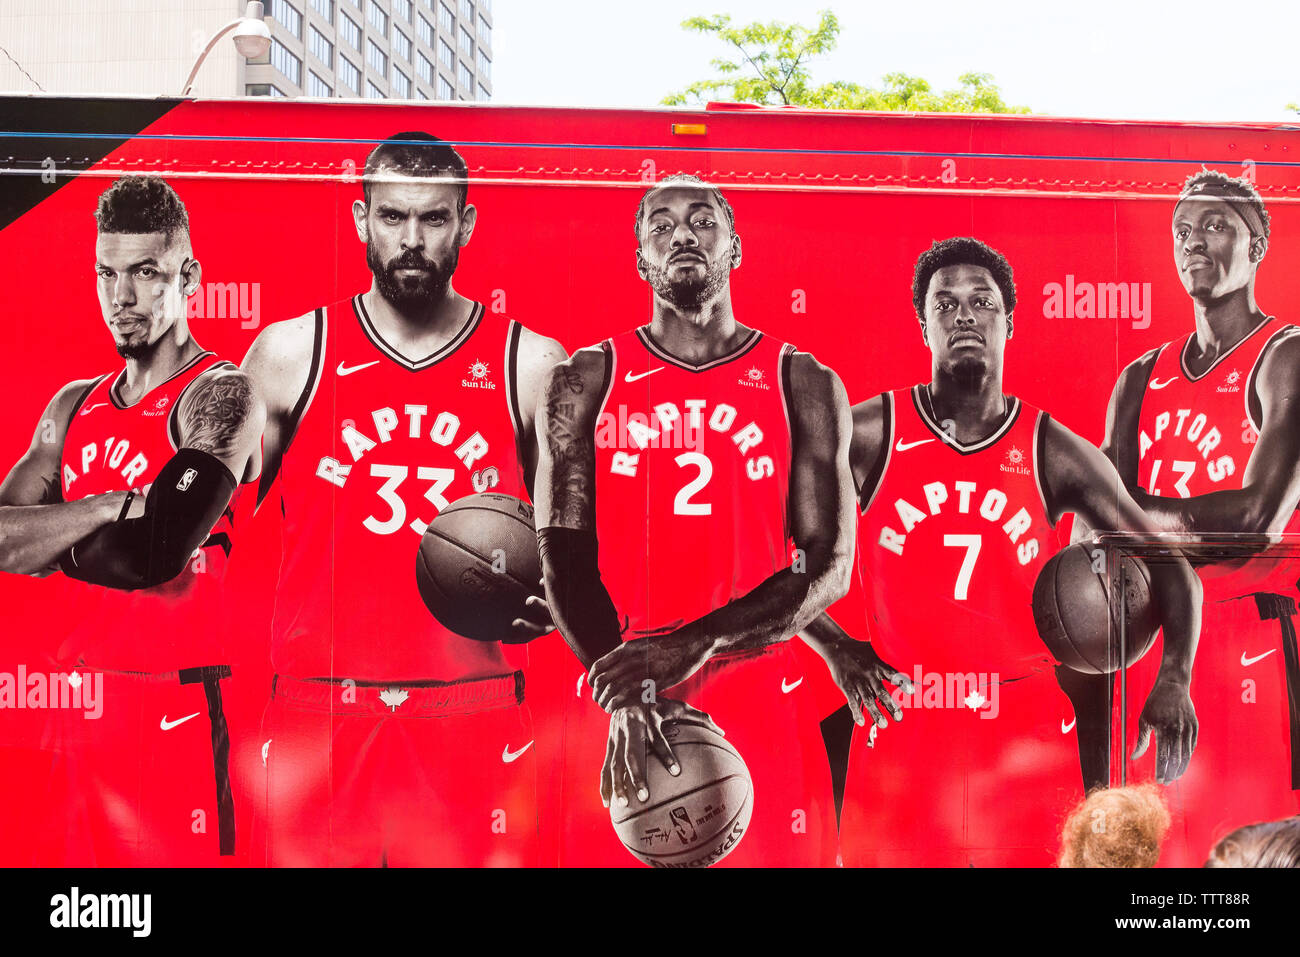 Toronto, ON, Canada - June 17, 2019 - Toronto Raptors players picture on the bus as the Toronto Raptors hold their victory parade after beating the Go Stock Photo